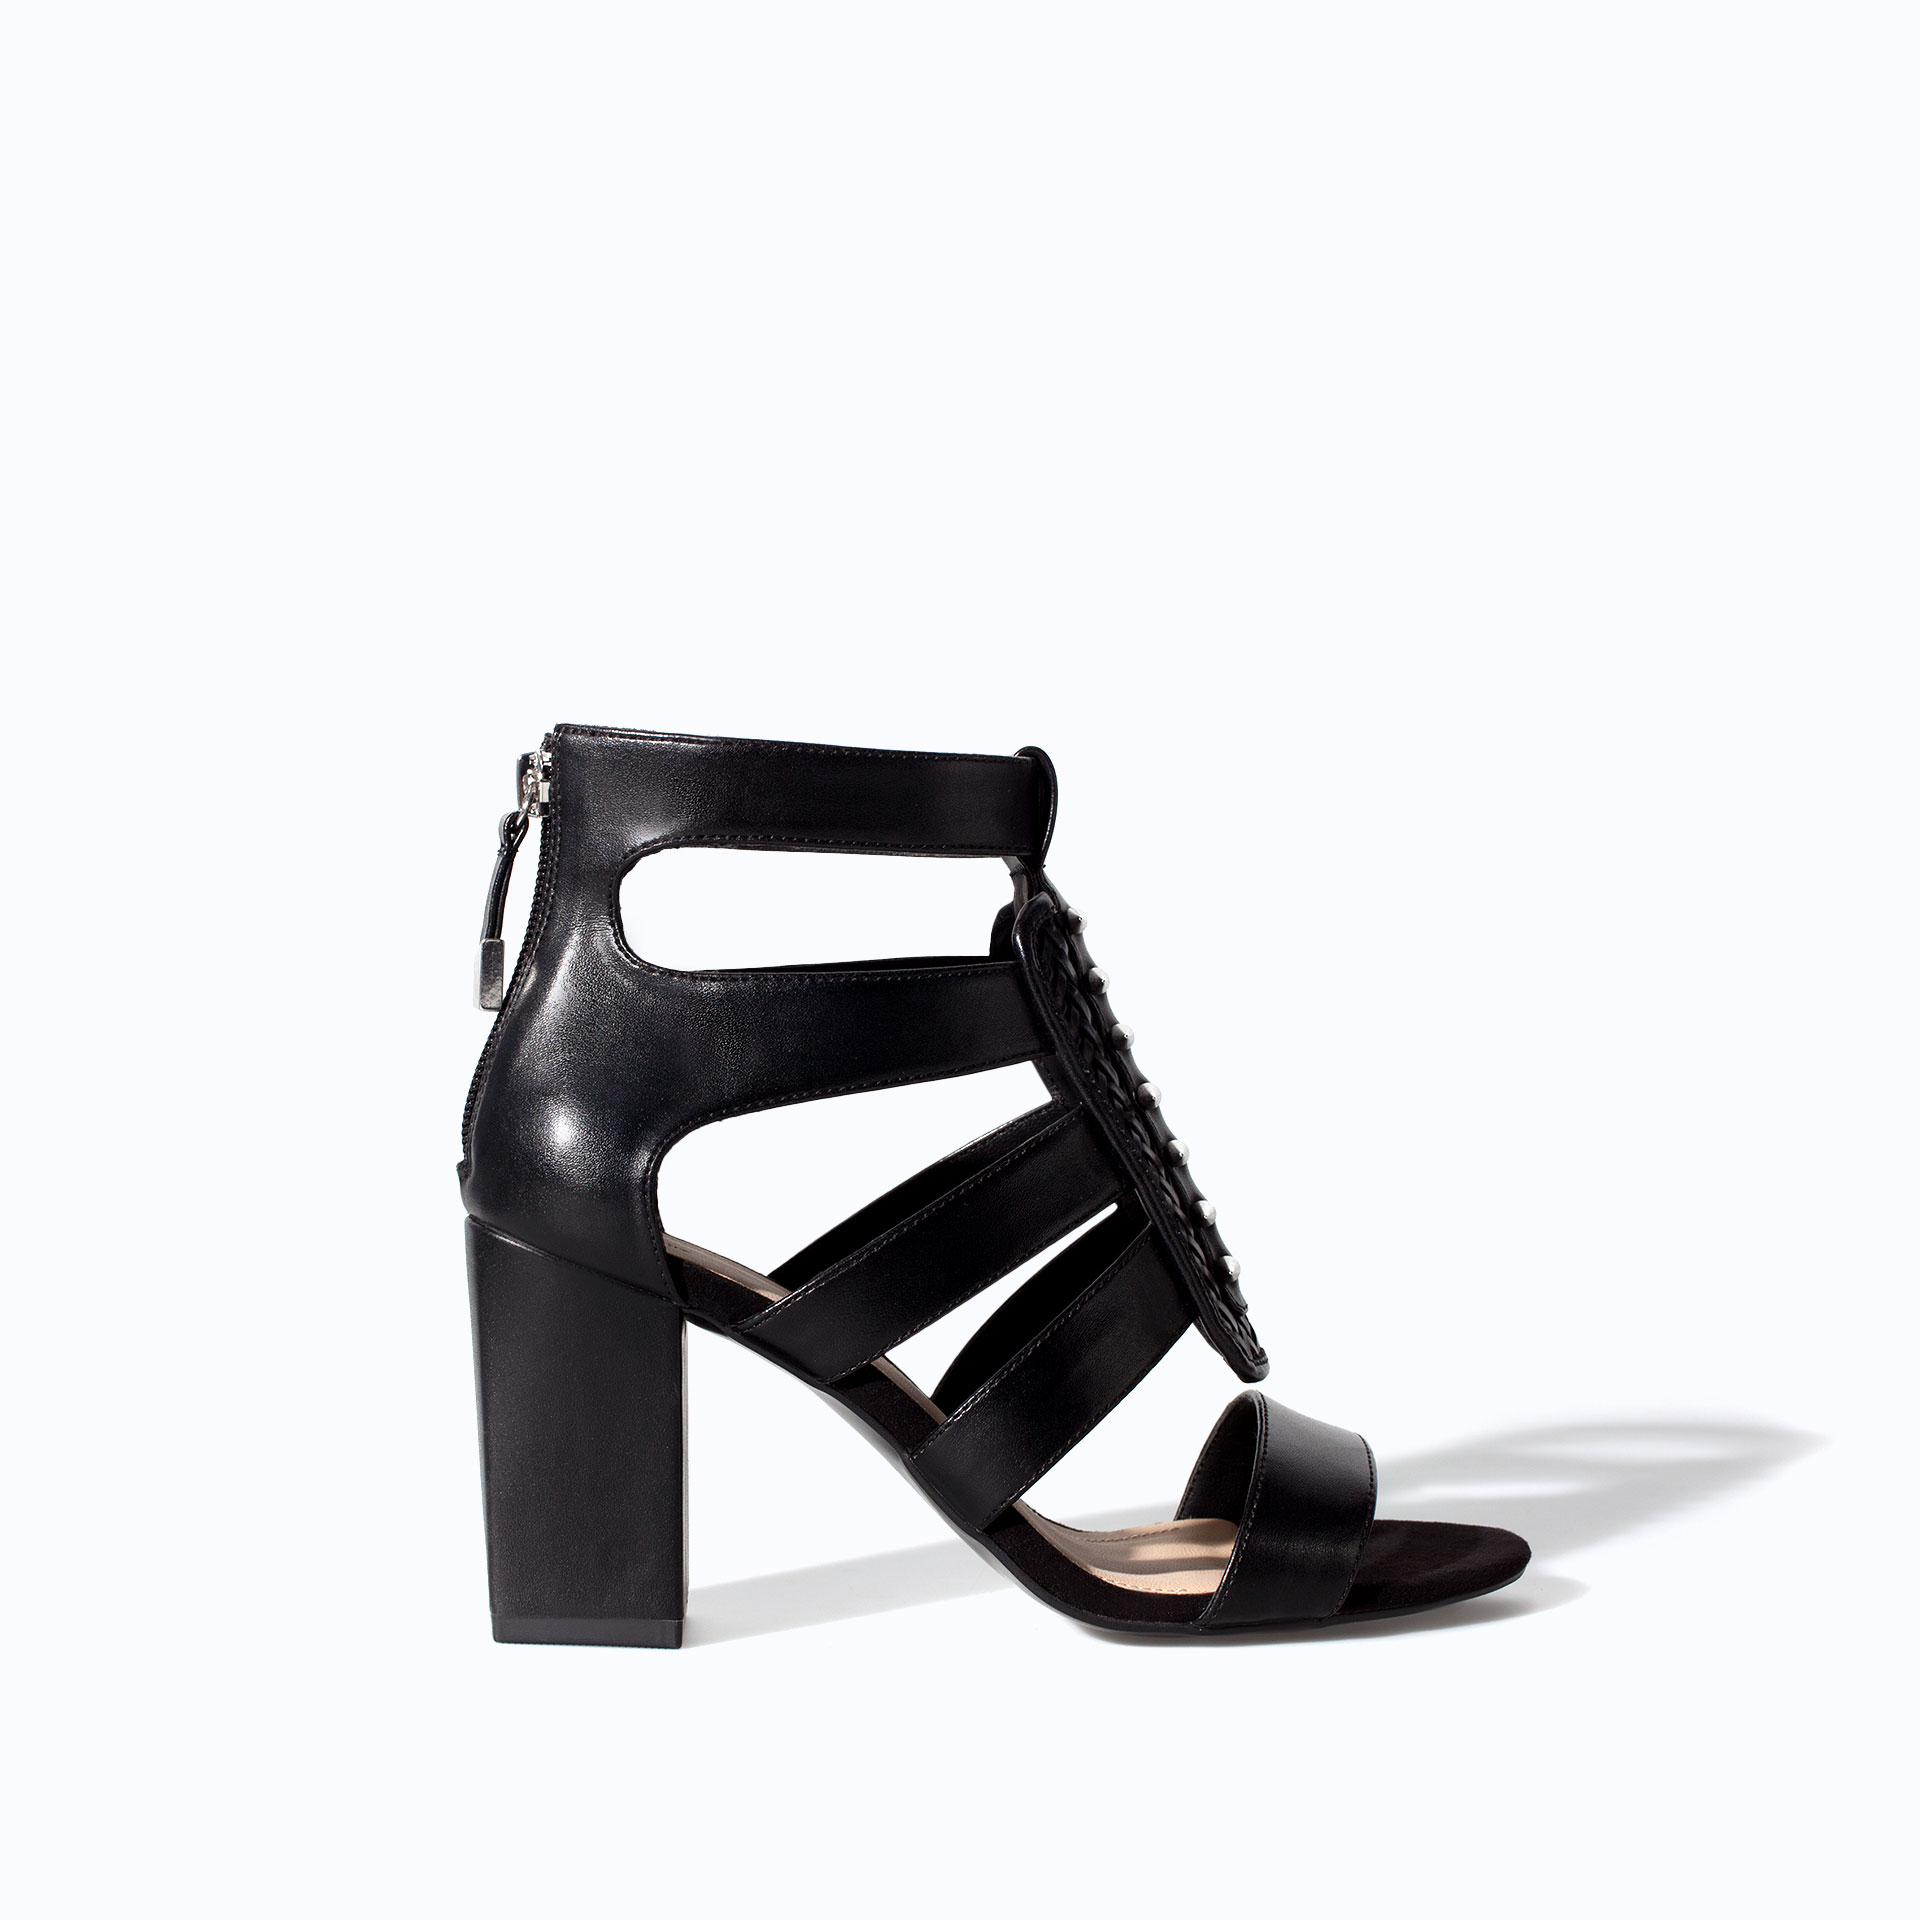 Zara High Heel Strappy Sandal With Metal Pins in Black | Lyst